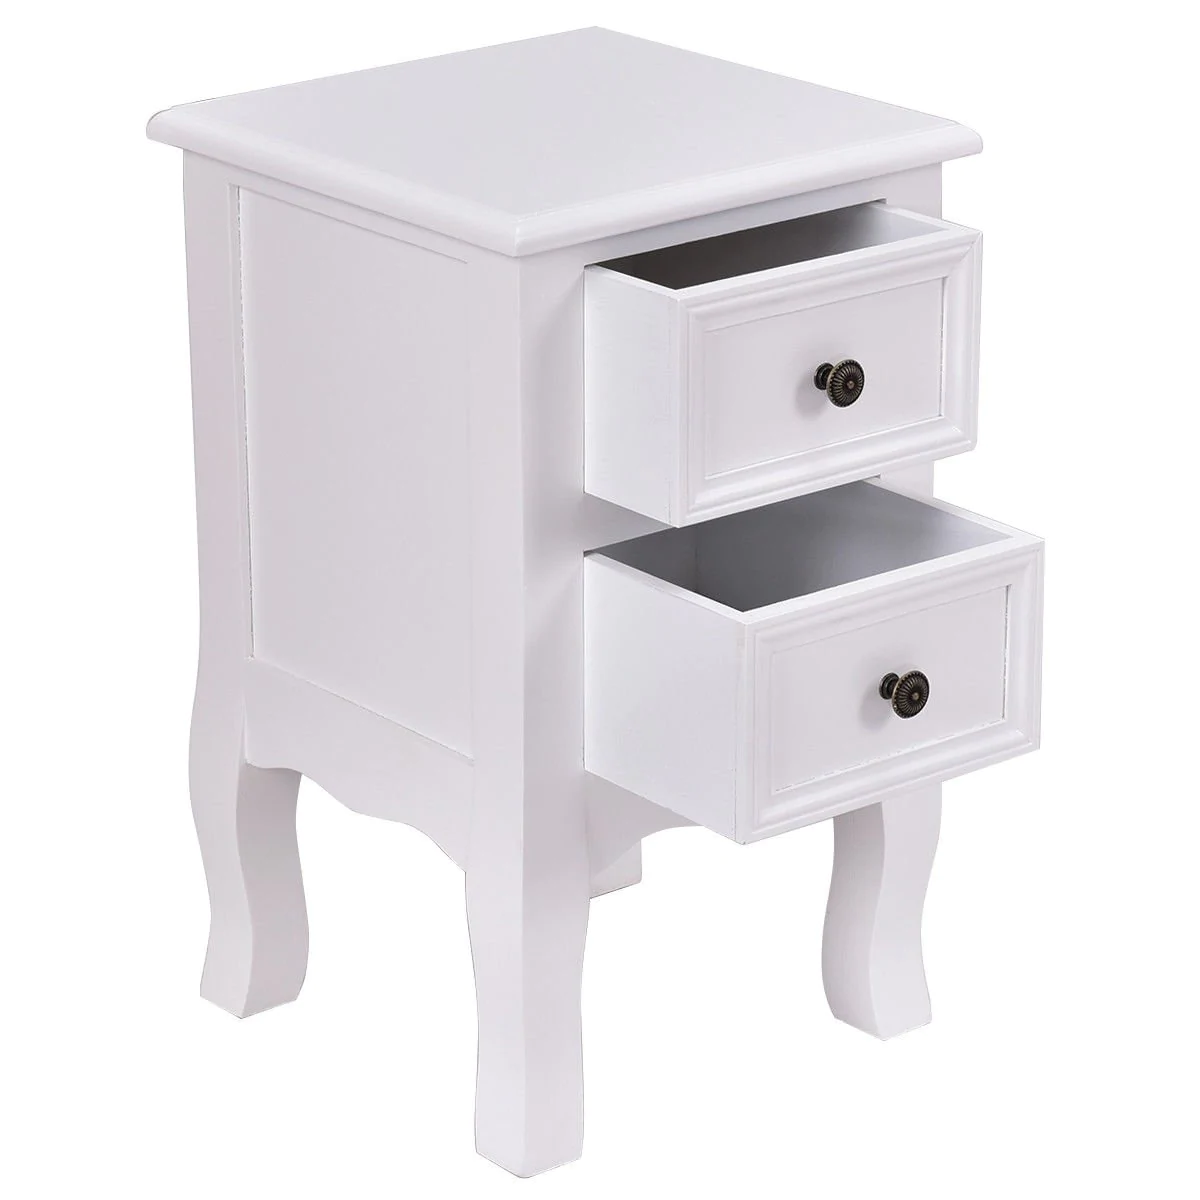 way white night stand storage drawers wood end accent table free shipping today hall console round with screw legs small nightstand diy tripod the furniture market acacia coffee